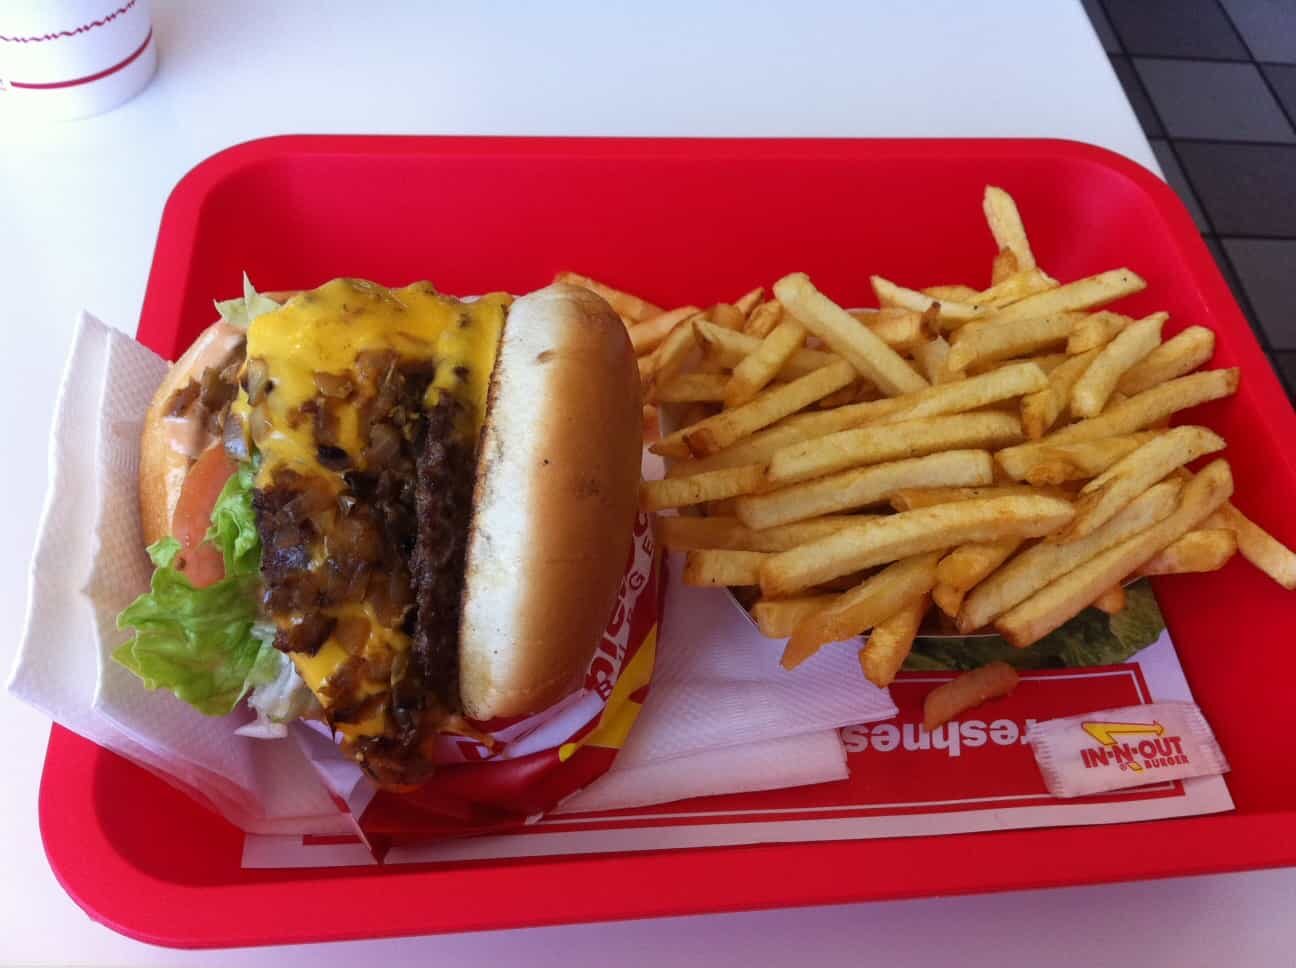 Simple Brilliant Error Proofing at the Amazing In-N-Out Burger – Lean Blog